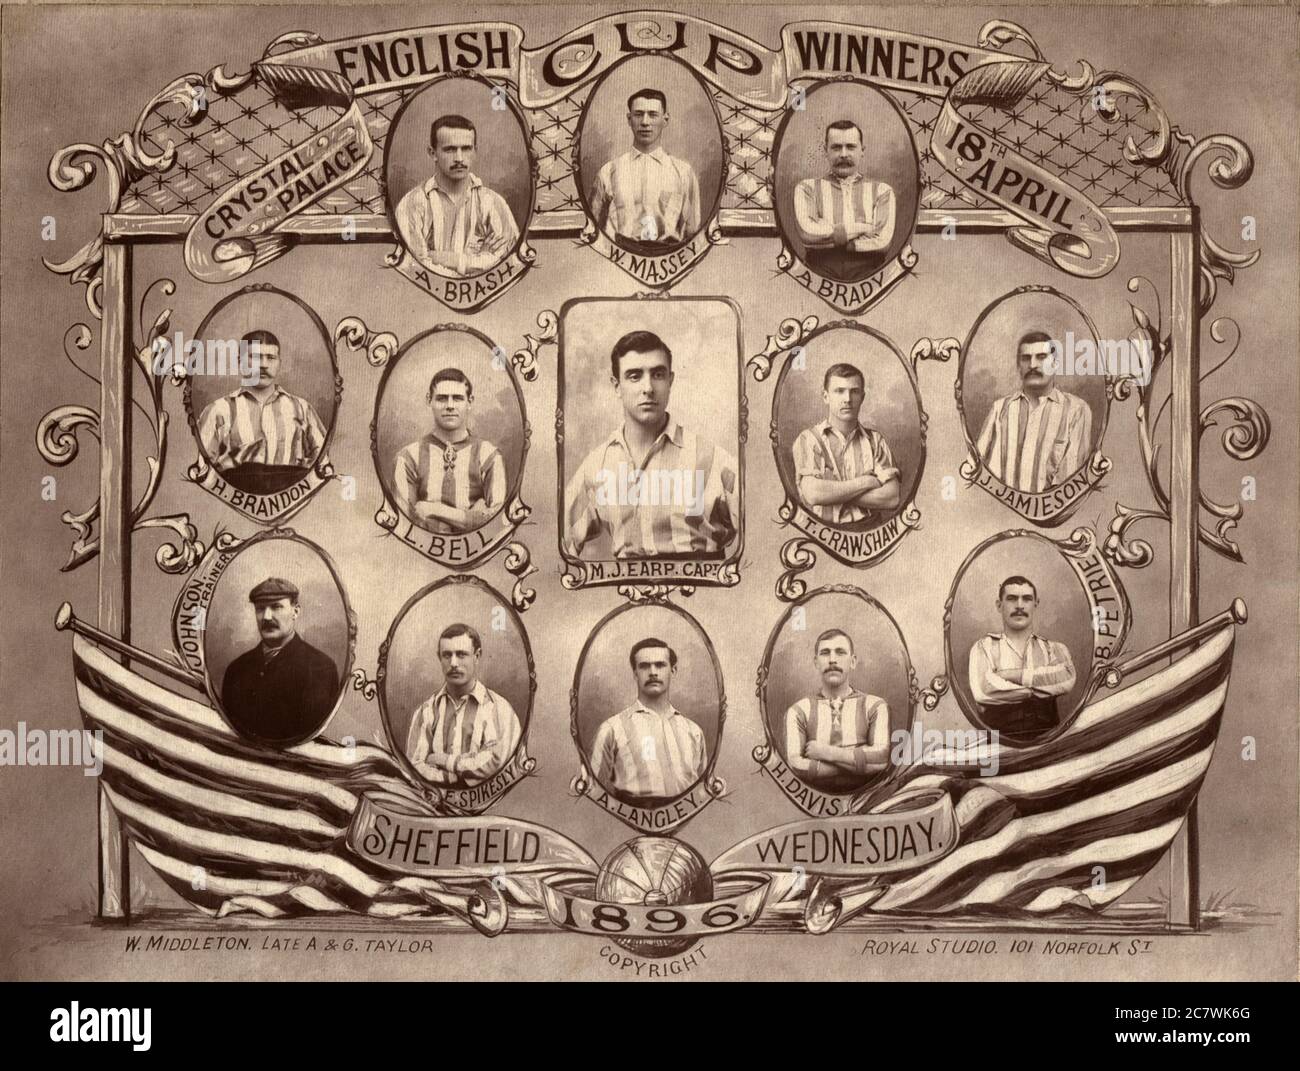 A commemorative portrait of the Sheffield Wednesday F.C. football team who won the F.A. Cup Final by two goals to one against Wolverhampton Wanderers at Crystal Palace on 18 April 1896. Stock Photo